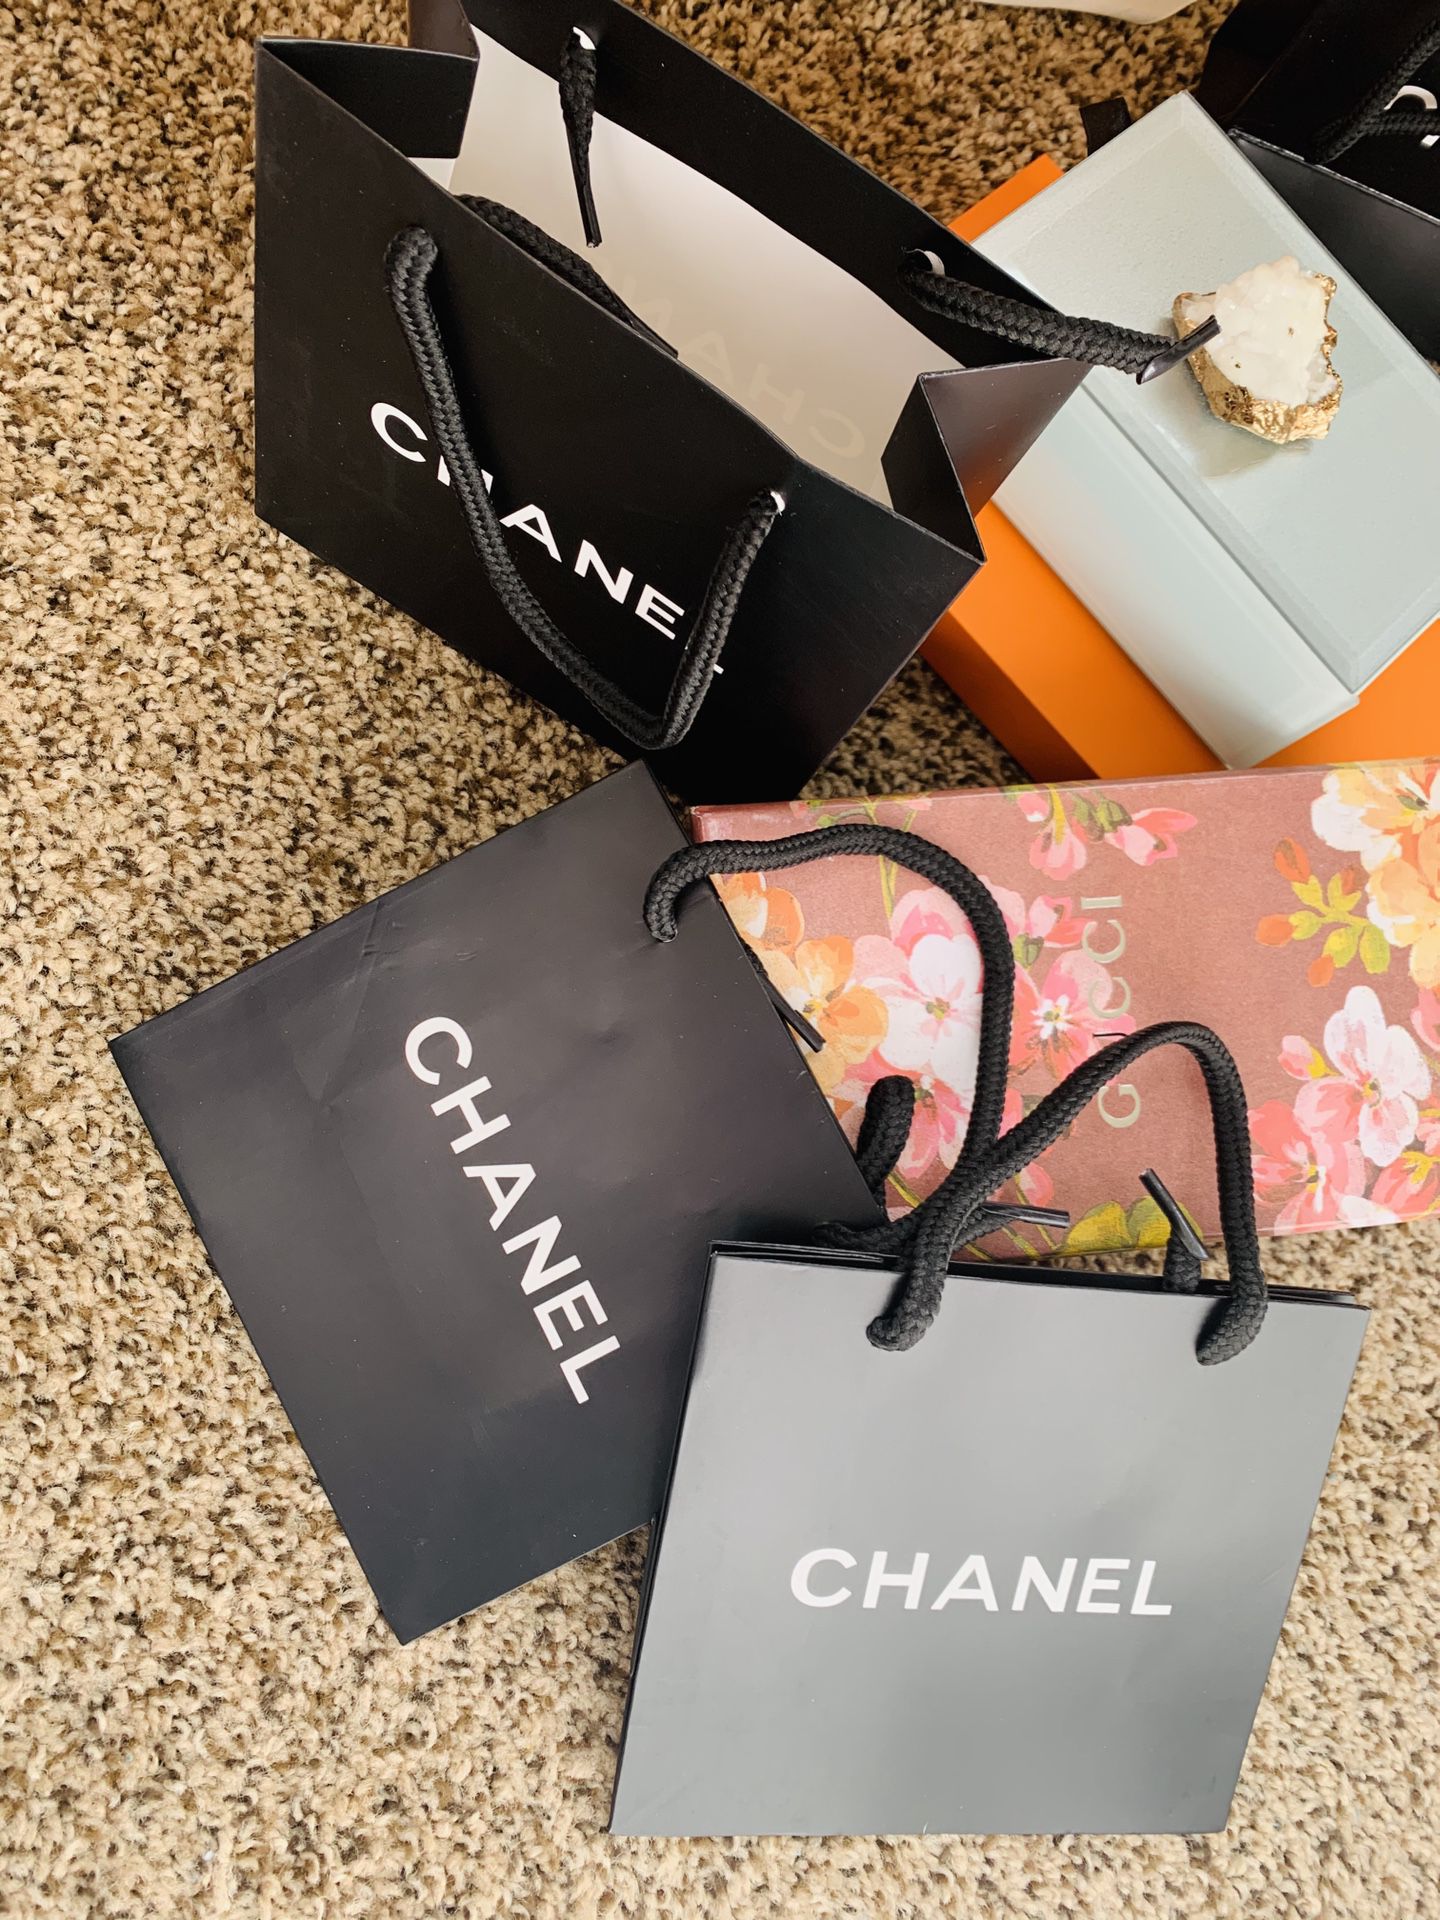 Chanel shopping bag bundle 3 pieces small bags